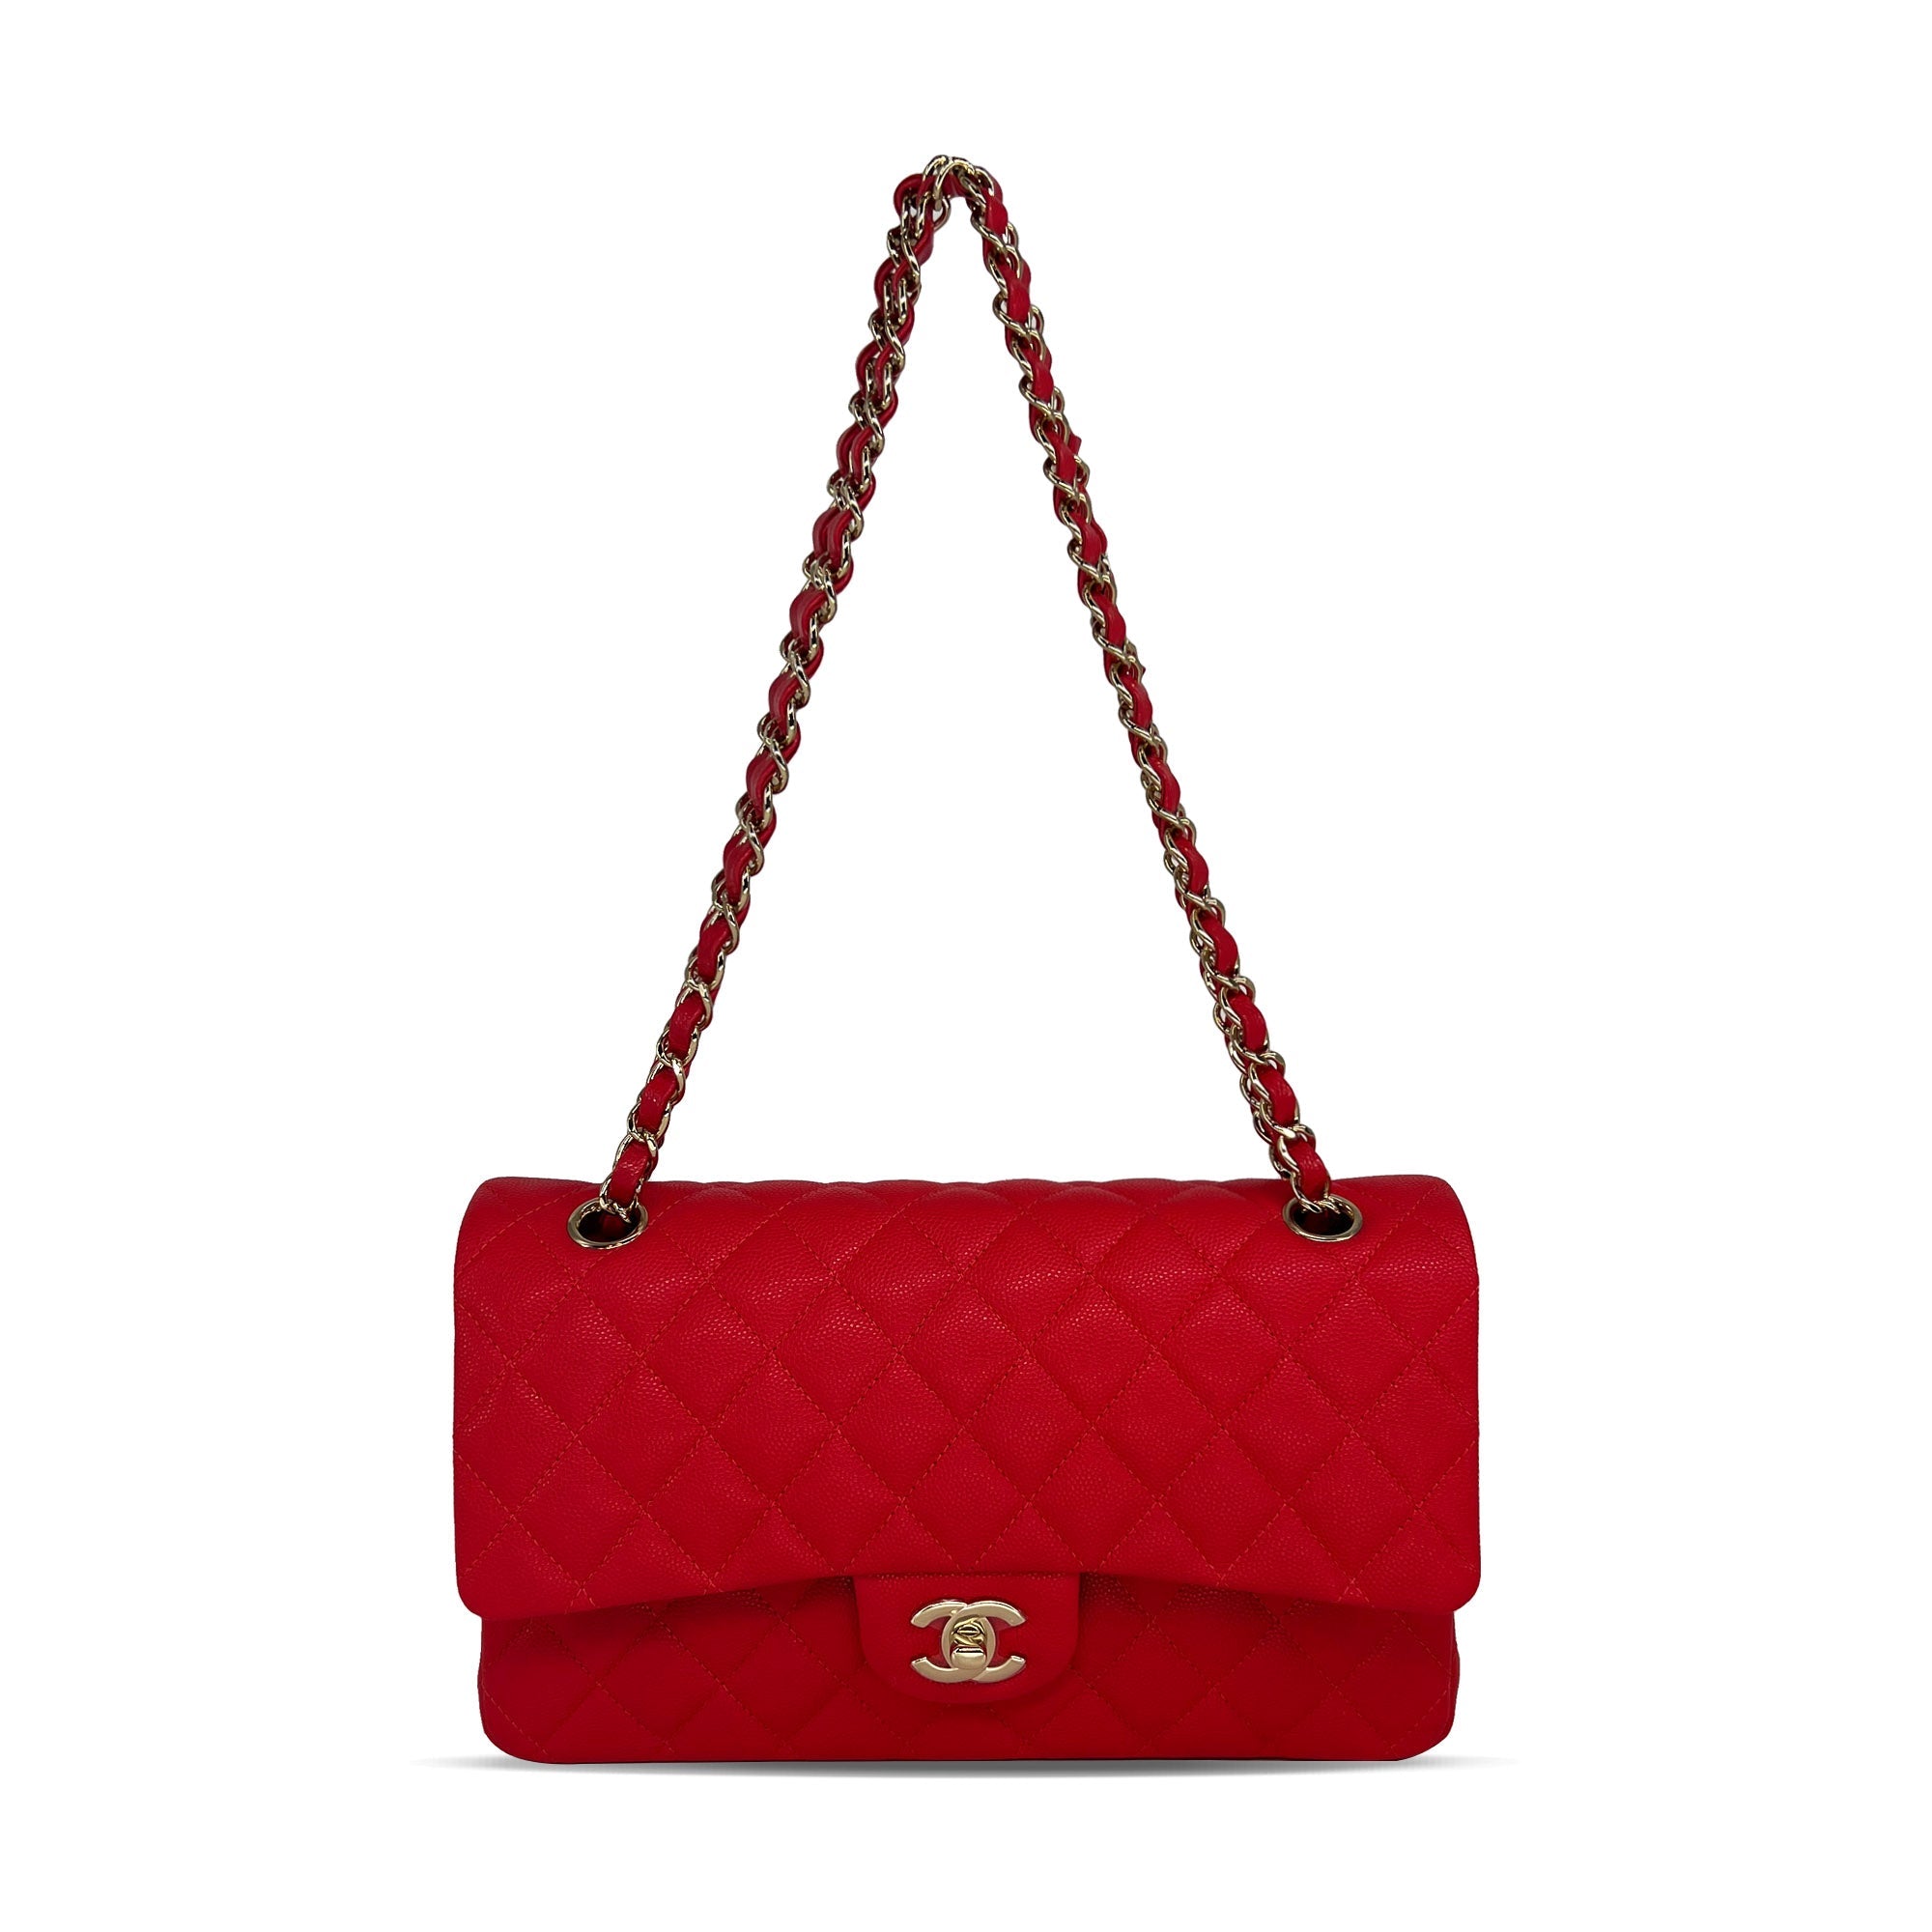 Chanel red/watermelon caviar leather double flap closure bag